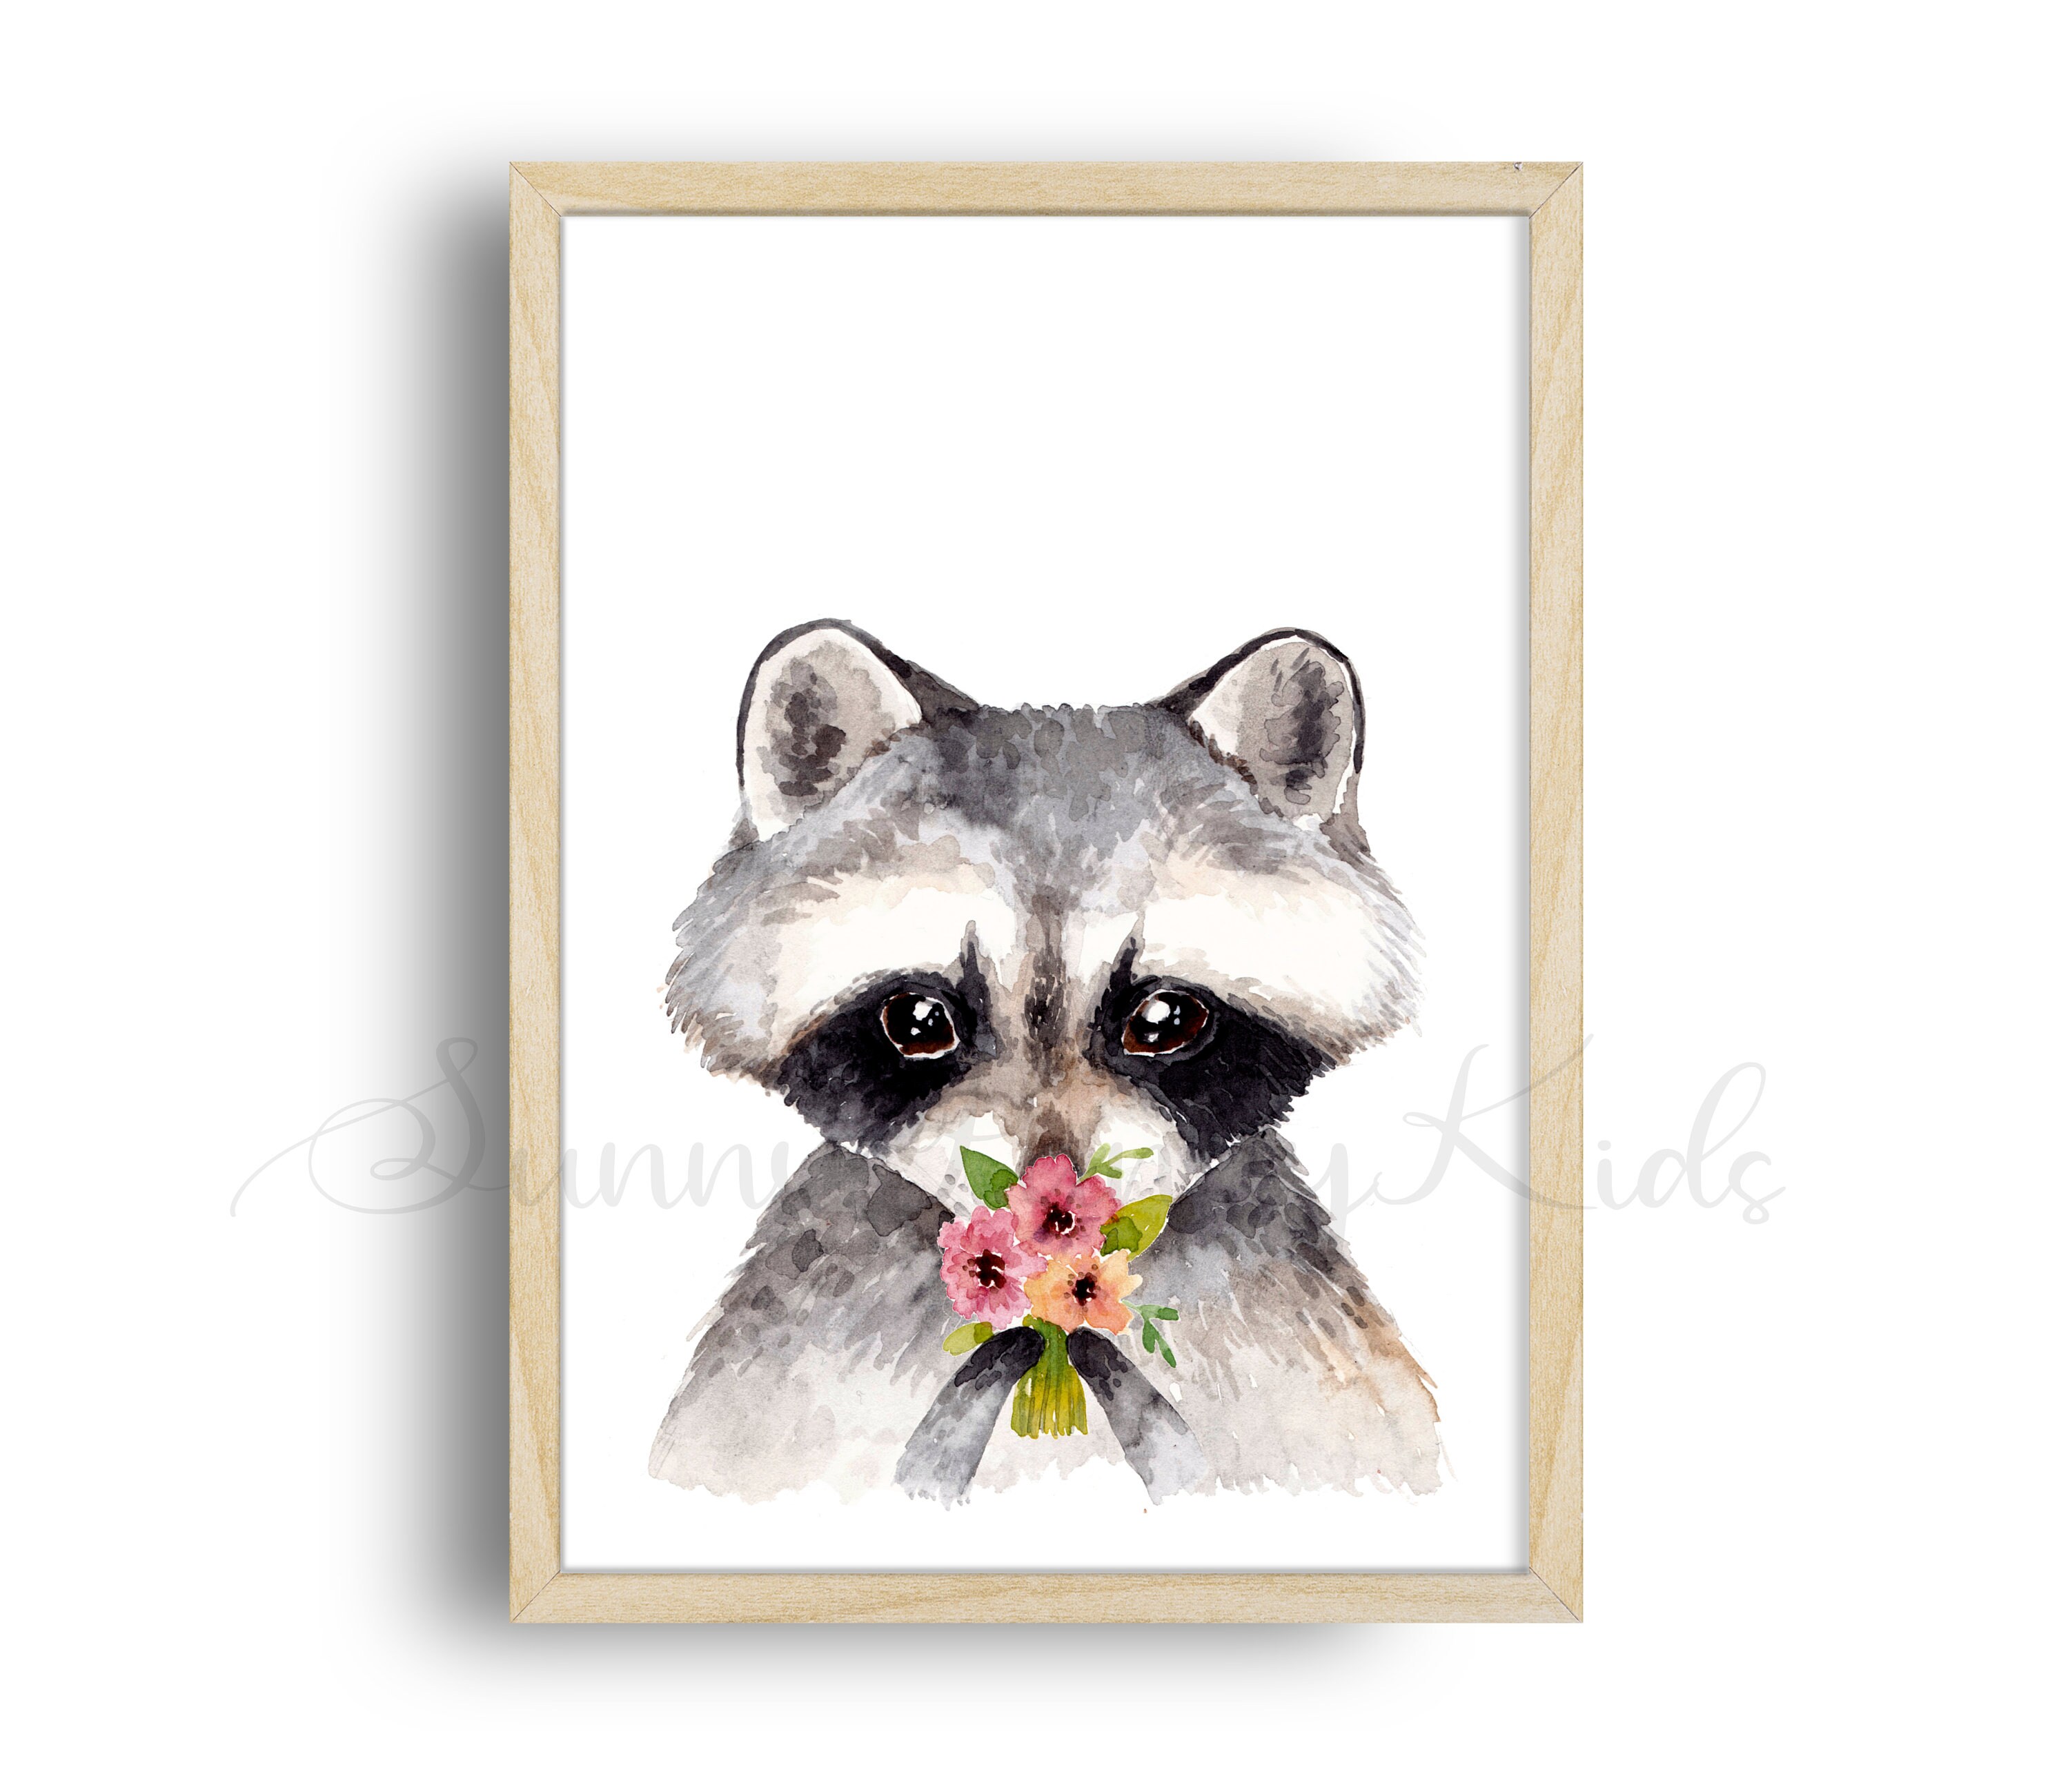 Details about   Raccoon Print Large Wall Raccoon Watercolor,Baby Gift,Nursery Decor Woodland 